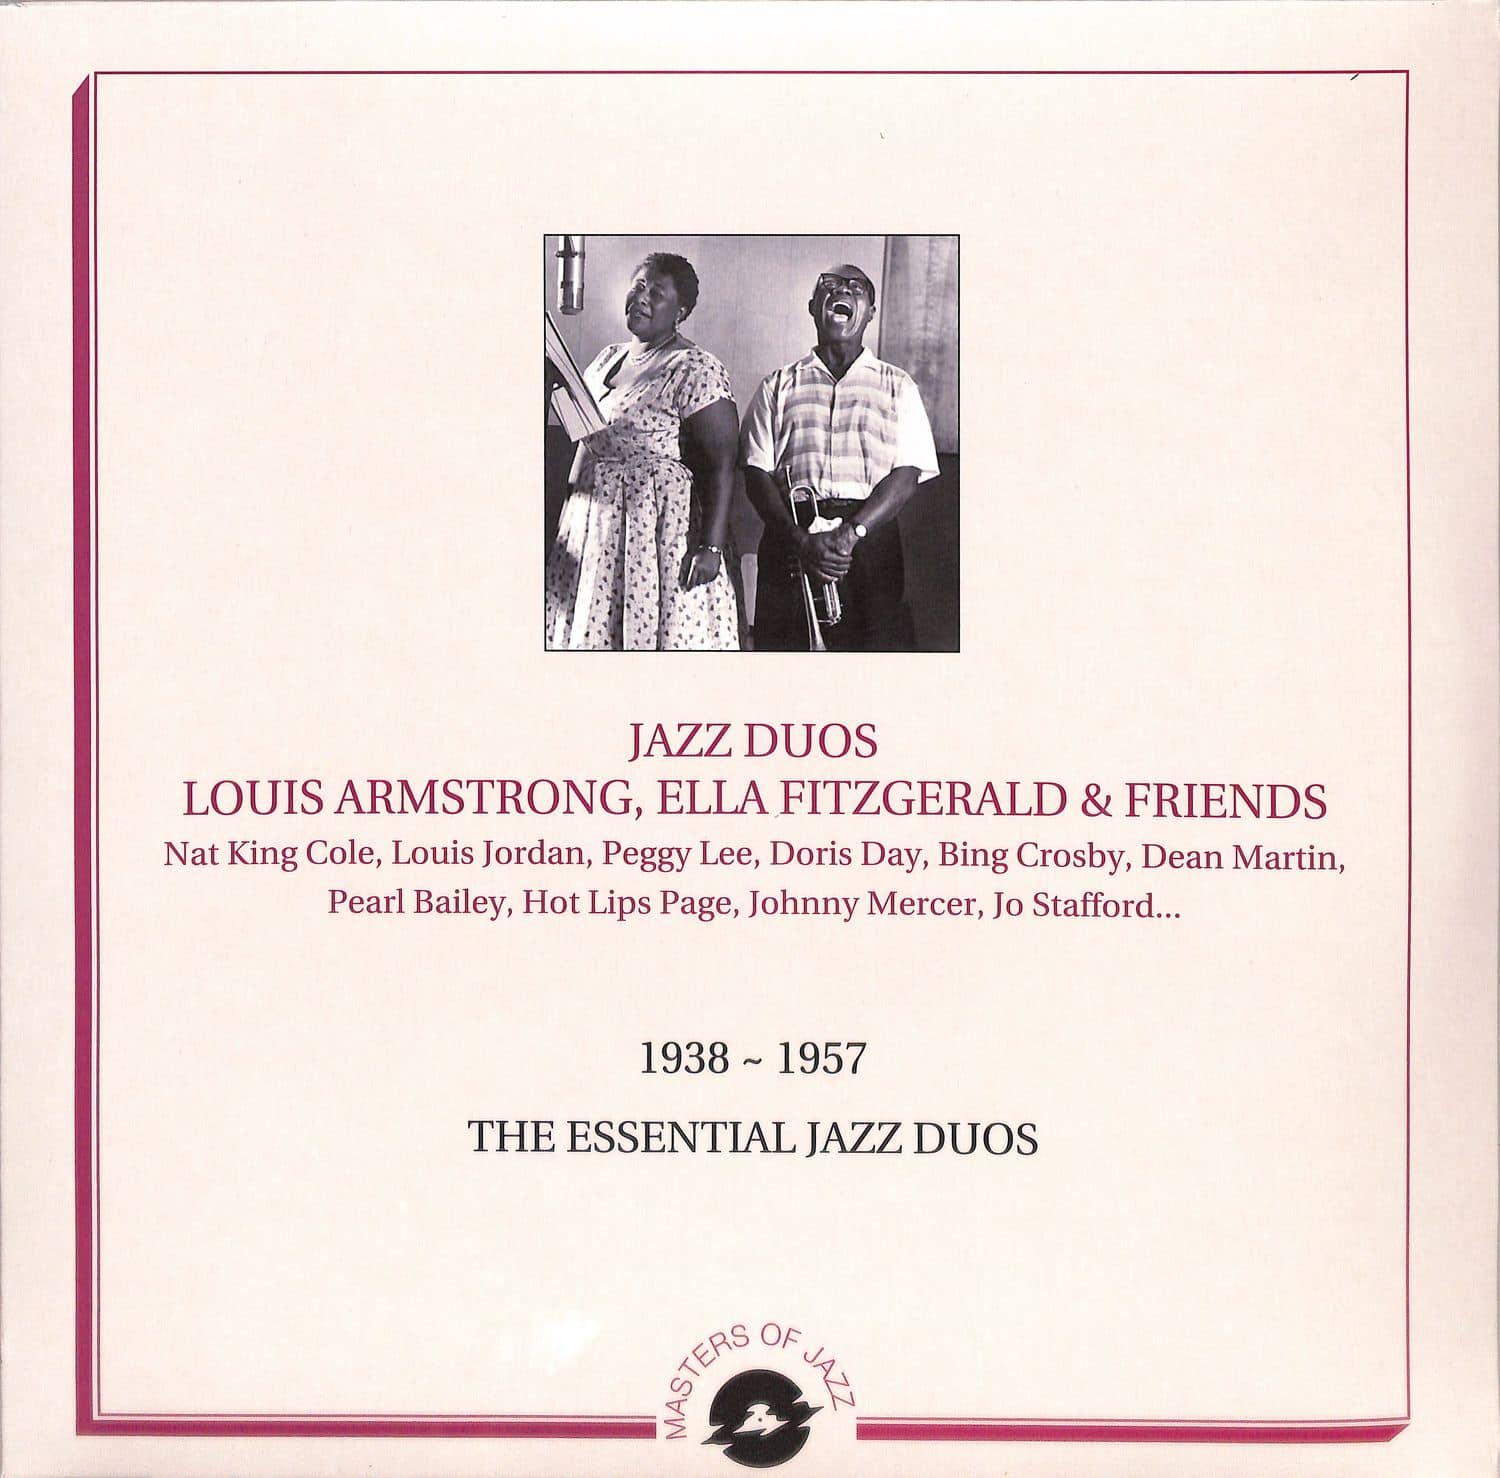 Louis Armstrong, Ella Fitzgerald & Friends - THE ESSENTIAL JAZZ DUOS 1938-1957 